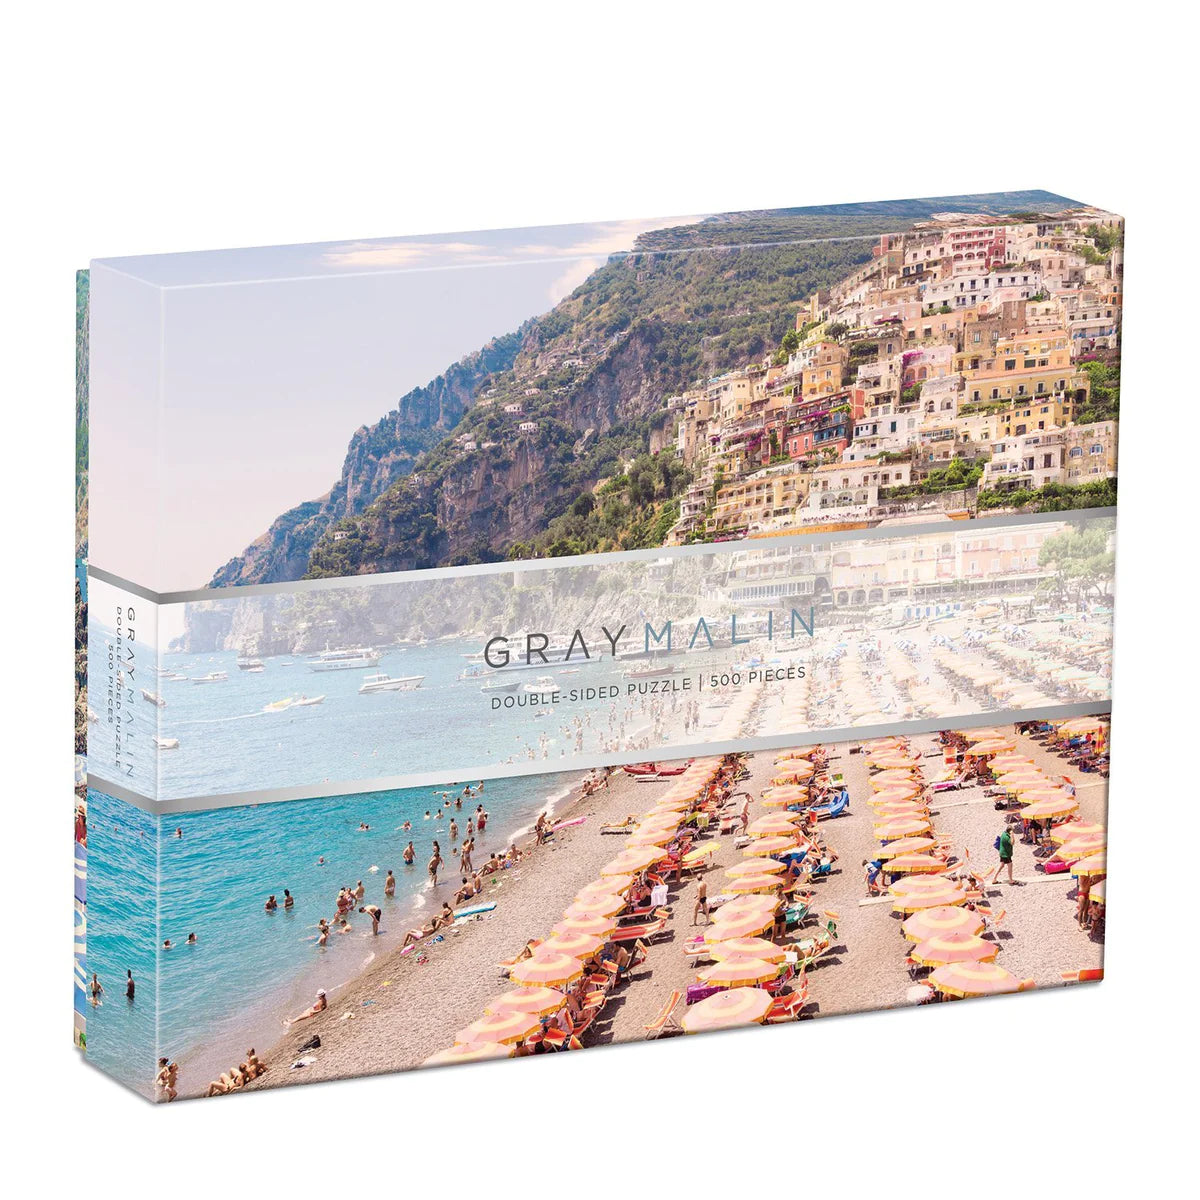 The Italy Double-Sided Puzzle | Gray Malin